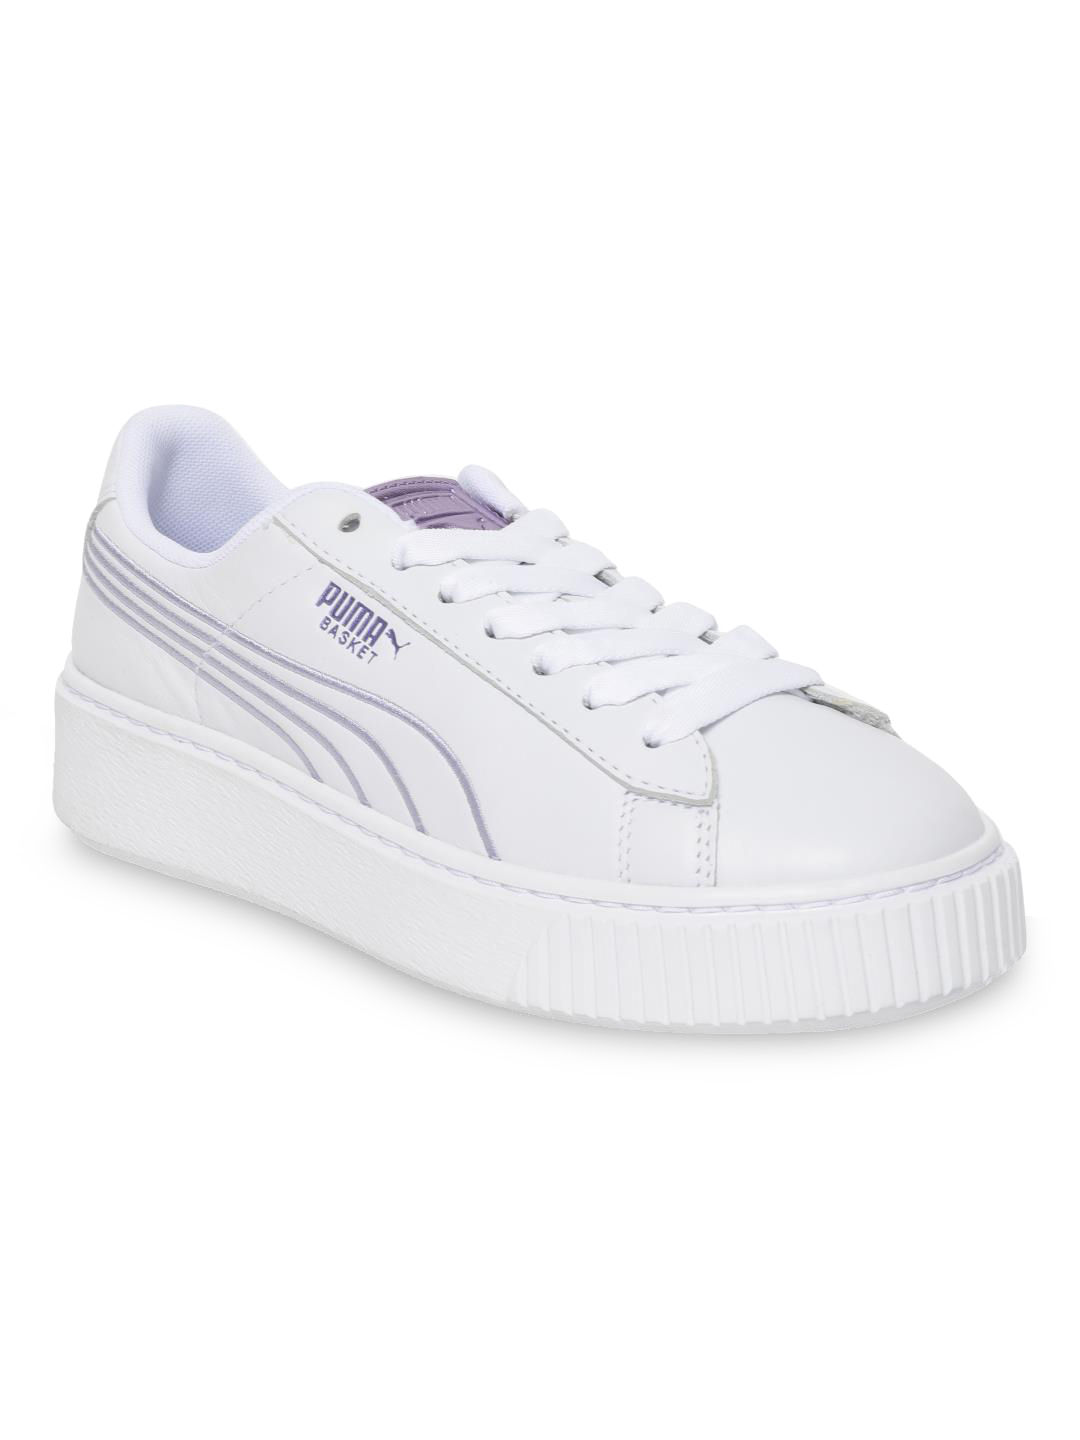 Puma Platform Twilight WNS Women Casual Shoes - White: Buy Puma Platform  Twilight WNS Women Casual Shoes - White Online at Best Price in India |  Nykaa